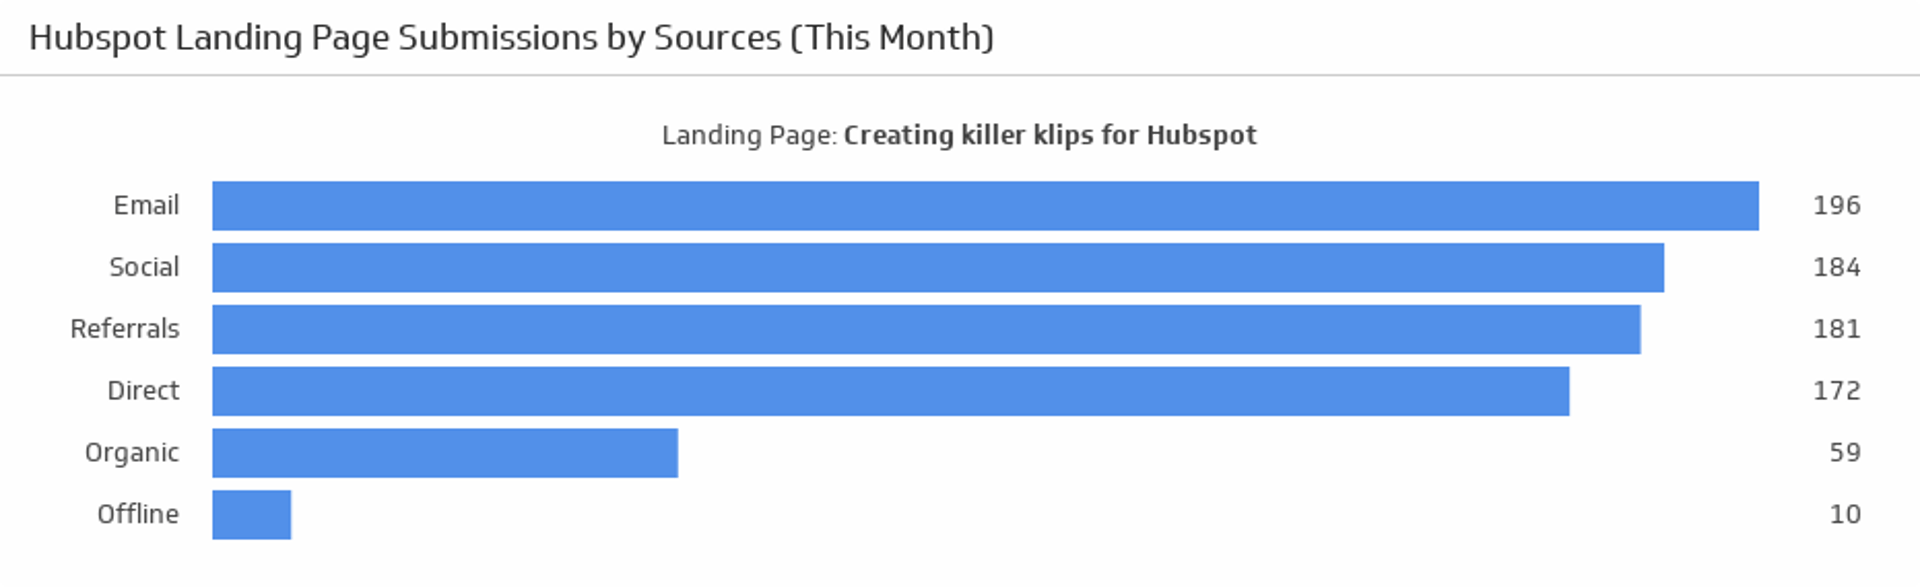 Hubspot Landing Page Submissions by Sources